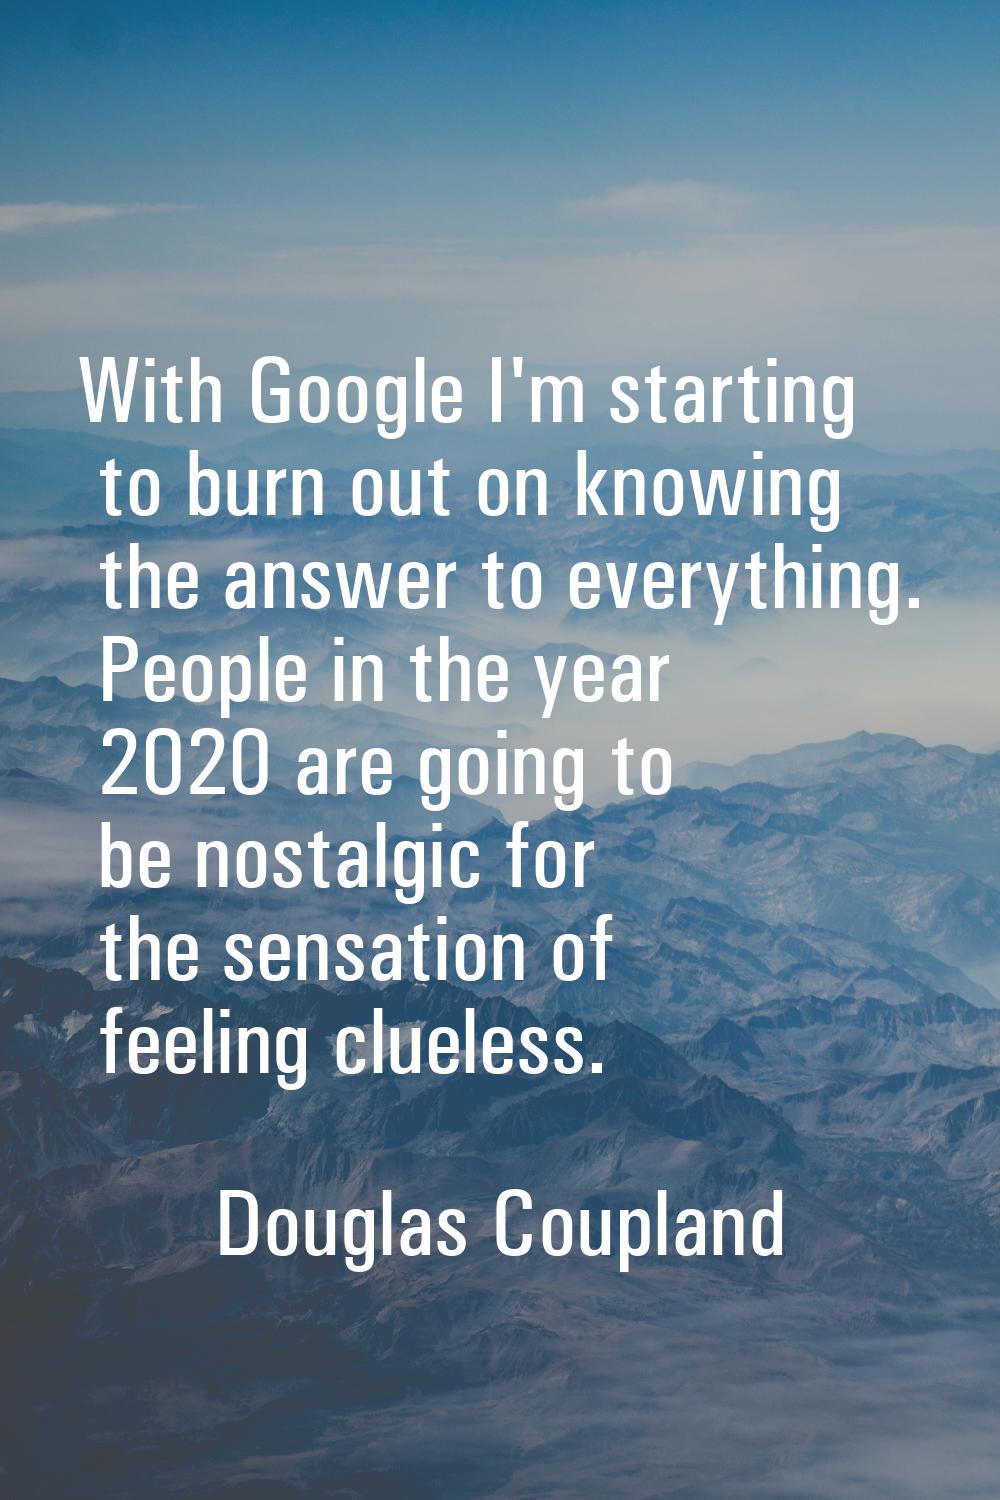 With Google I'm starting to burn out on knowing the answer to everything. People in the year 2020 a